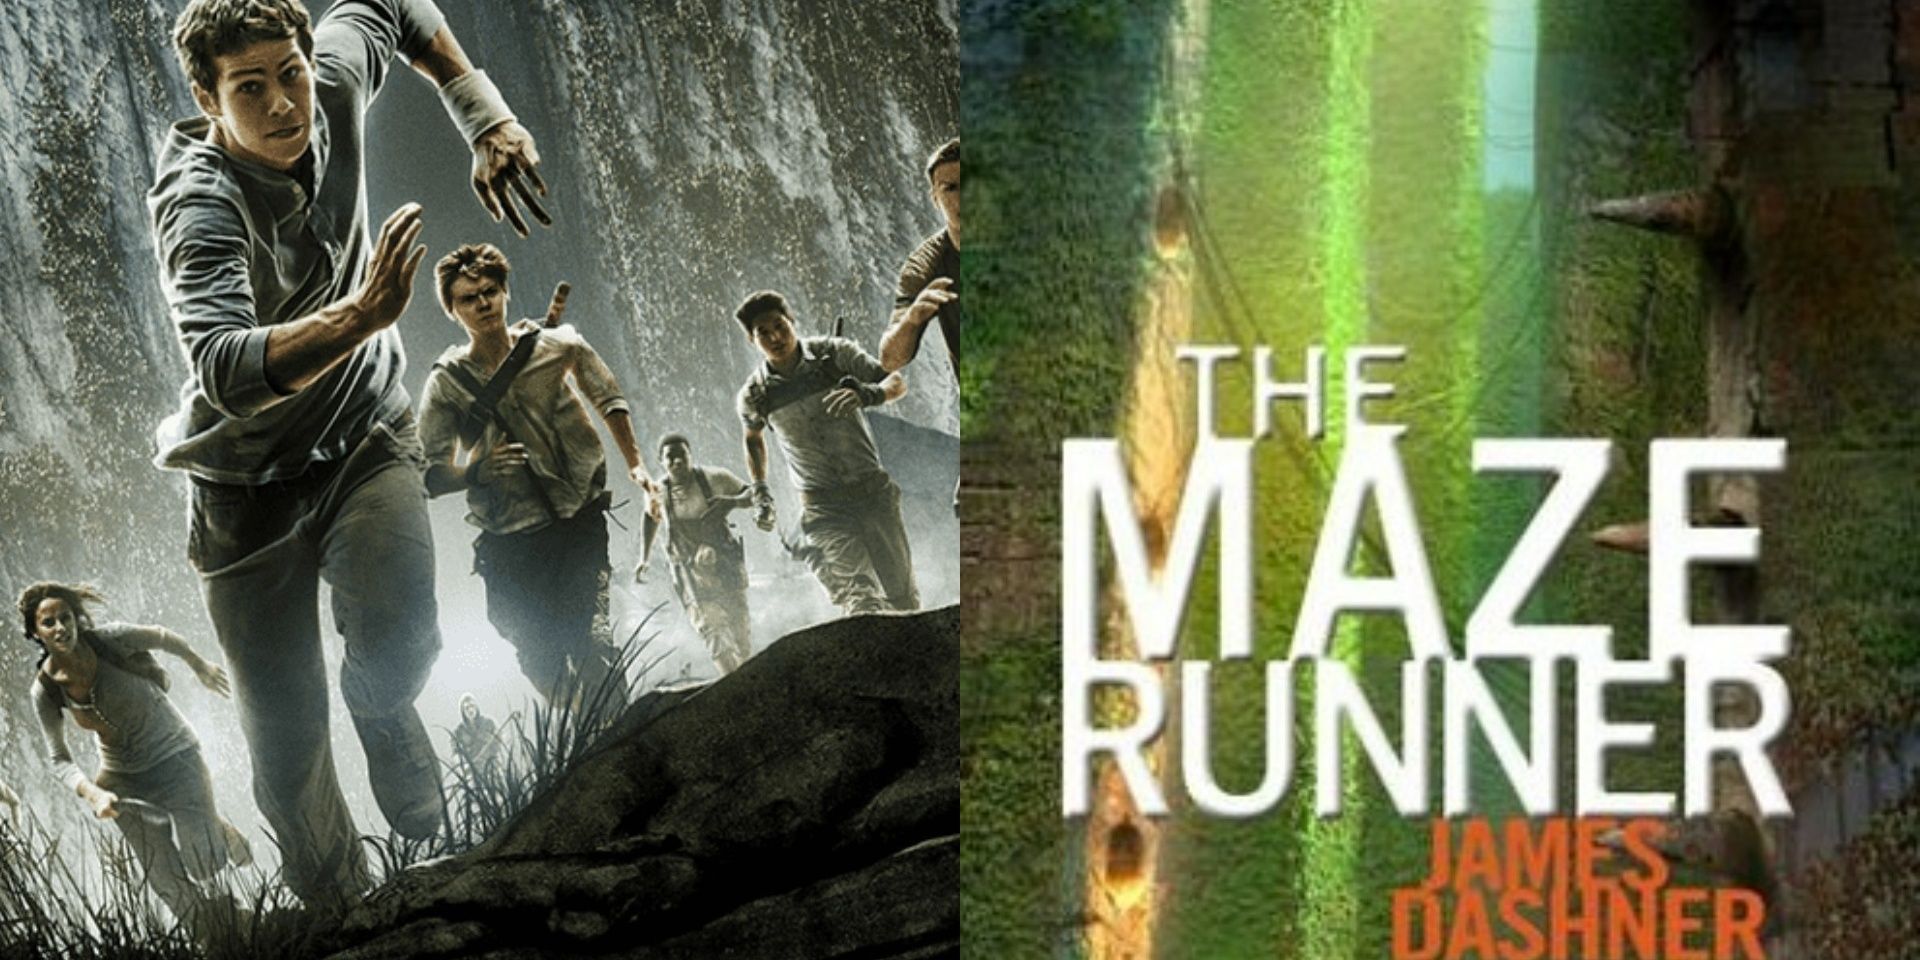 (Left) Group of teenagers running through maze / (Right) Maze Runner book cover of maze